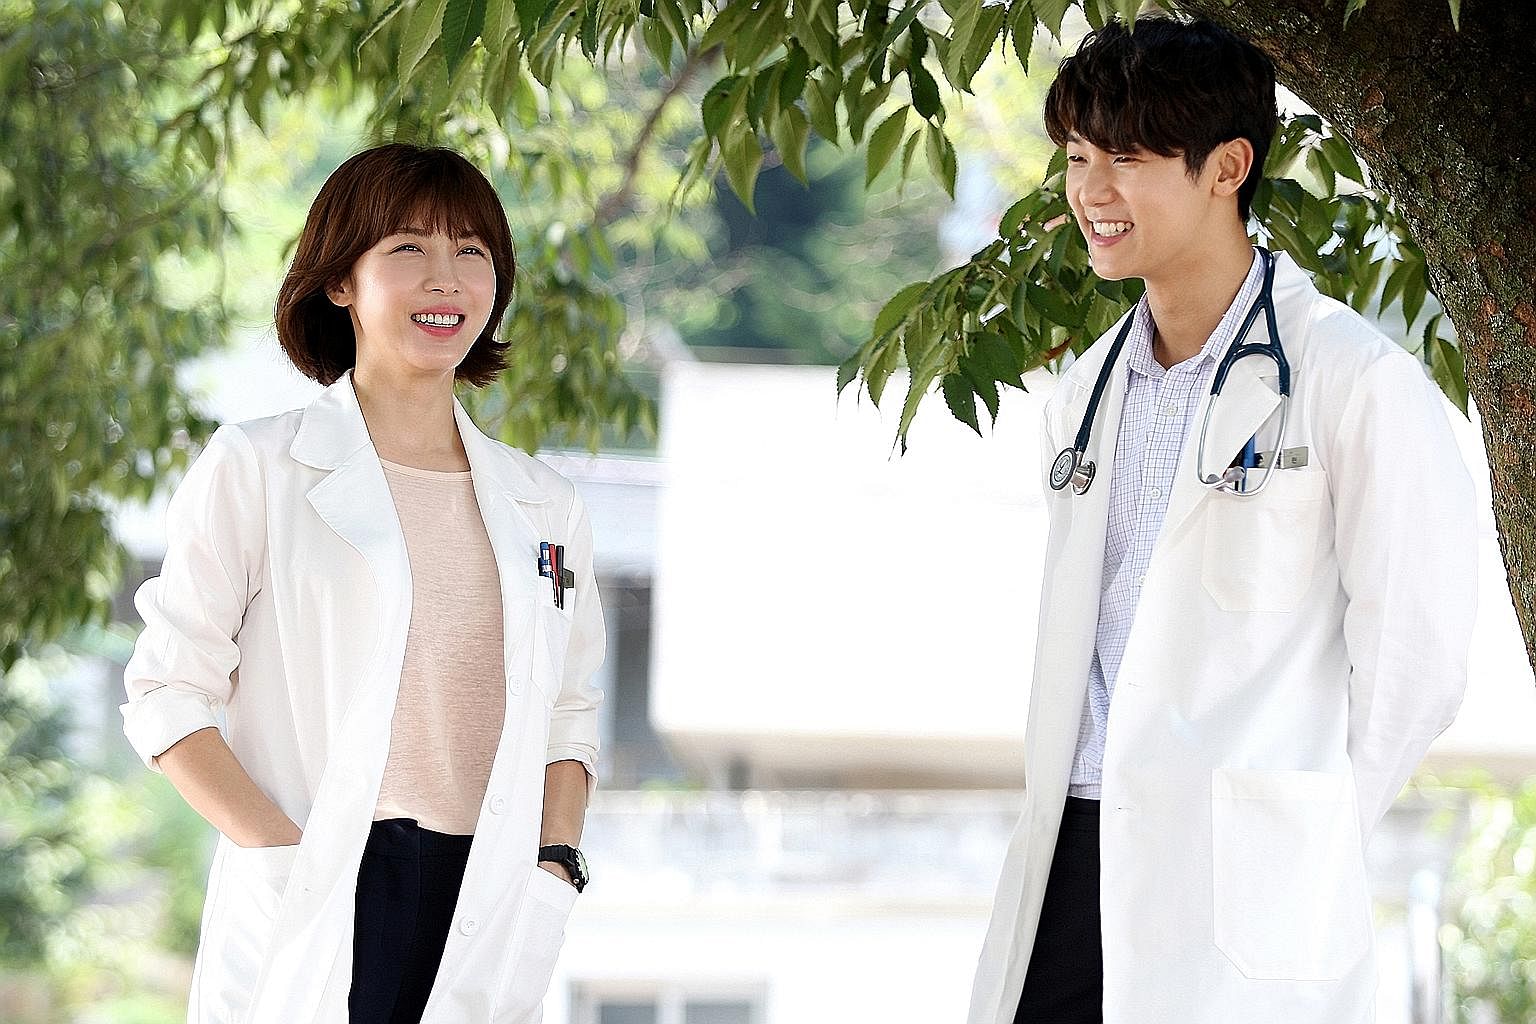 Actress Ha Ji Won and actor Kang Min Hyuk (both above) are doctors on board a vessel in Hospital Ship.